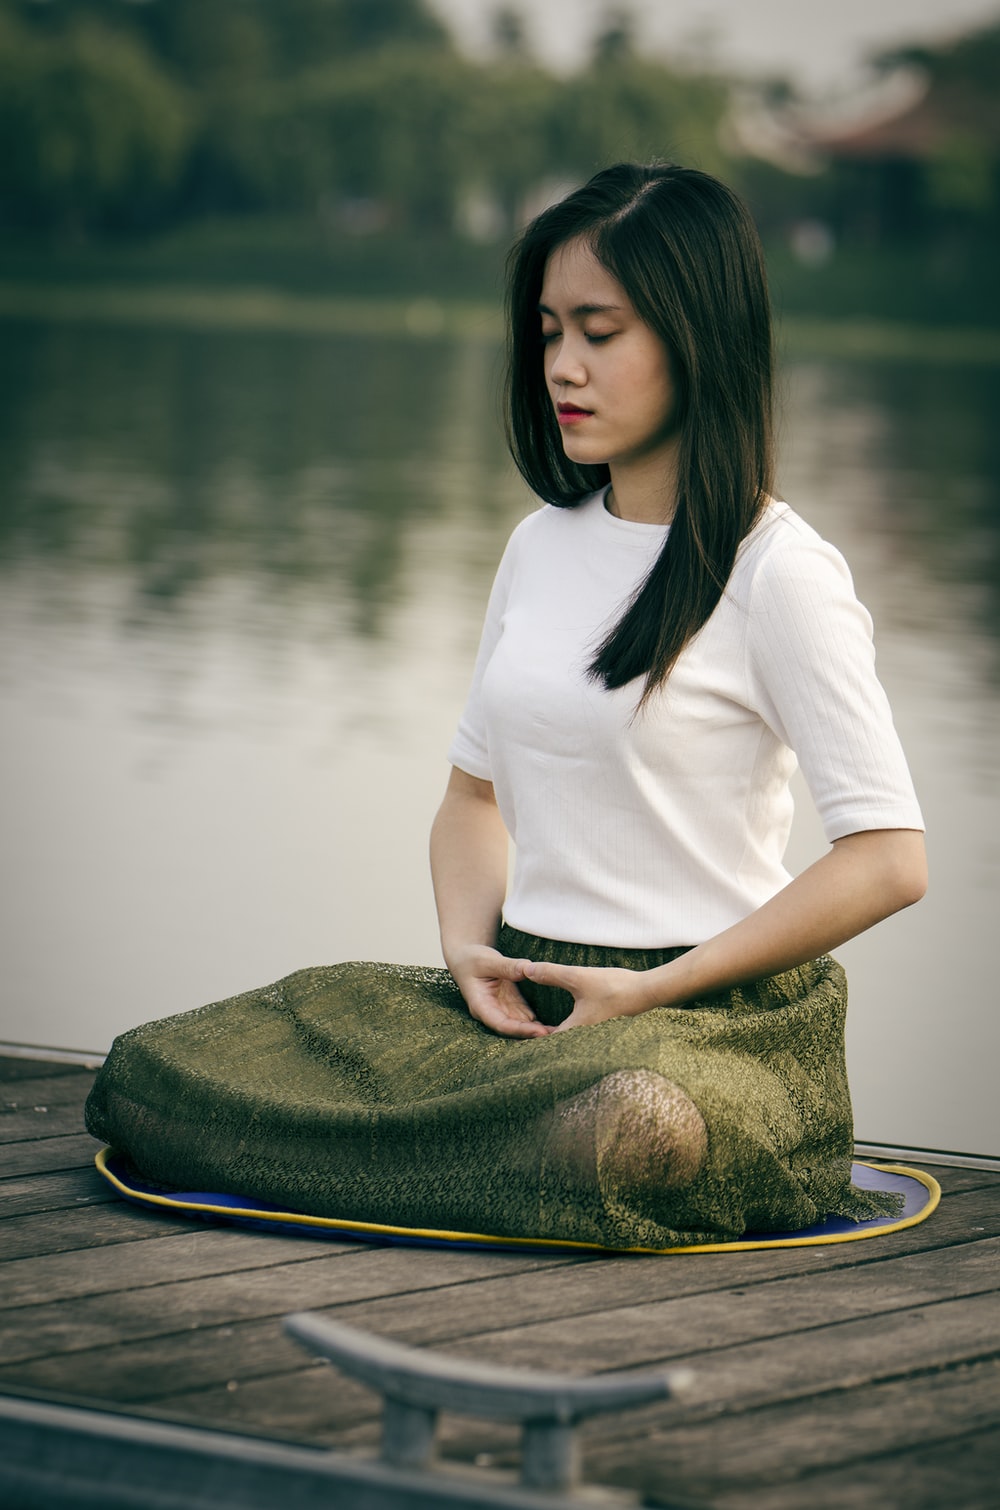 Ponder, contemplate and meditate whenever you can. - The Practicality of Buddhism: Is it the Teaching That's Impractical, or You? | Poh Ern Si Blog